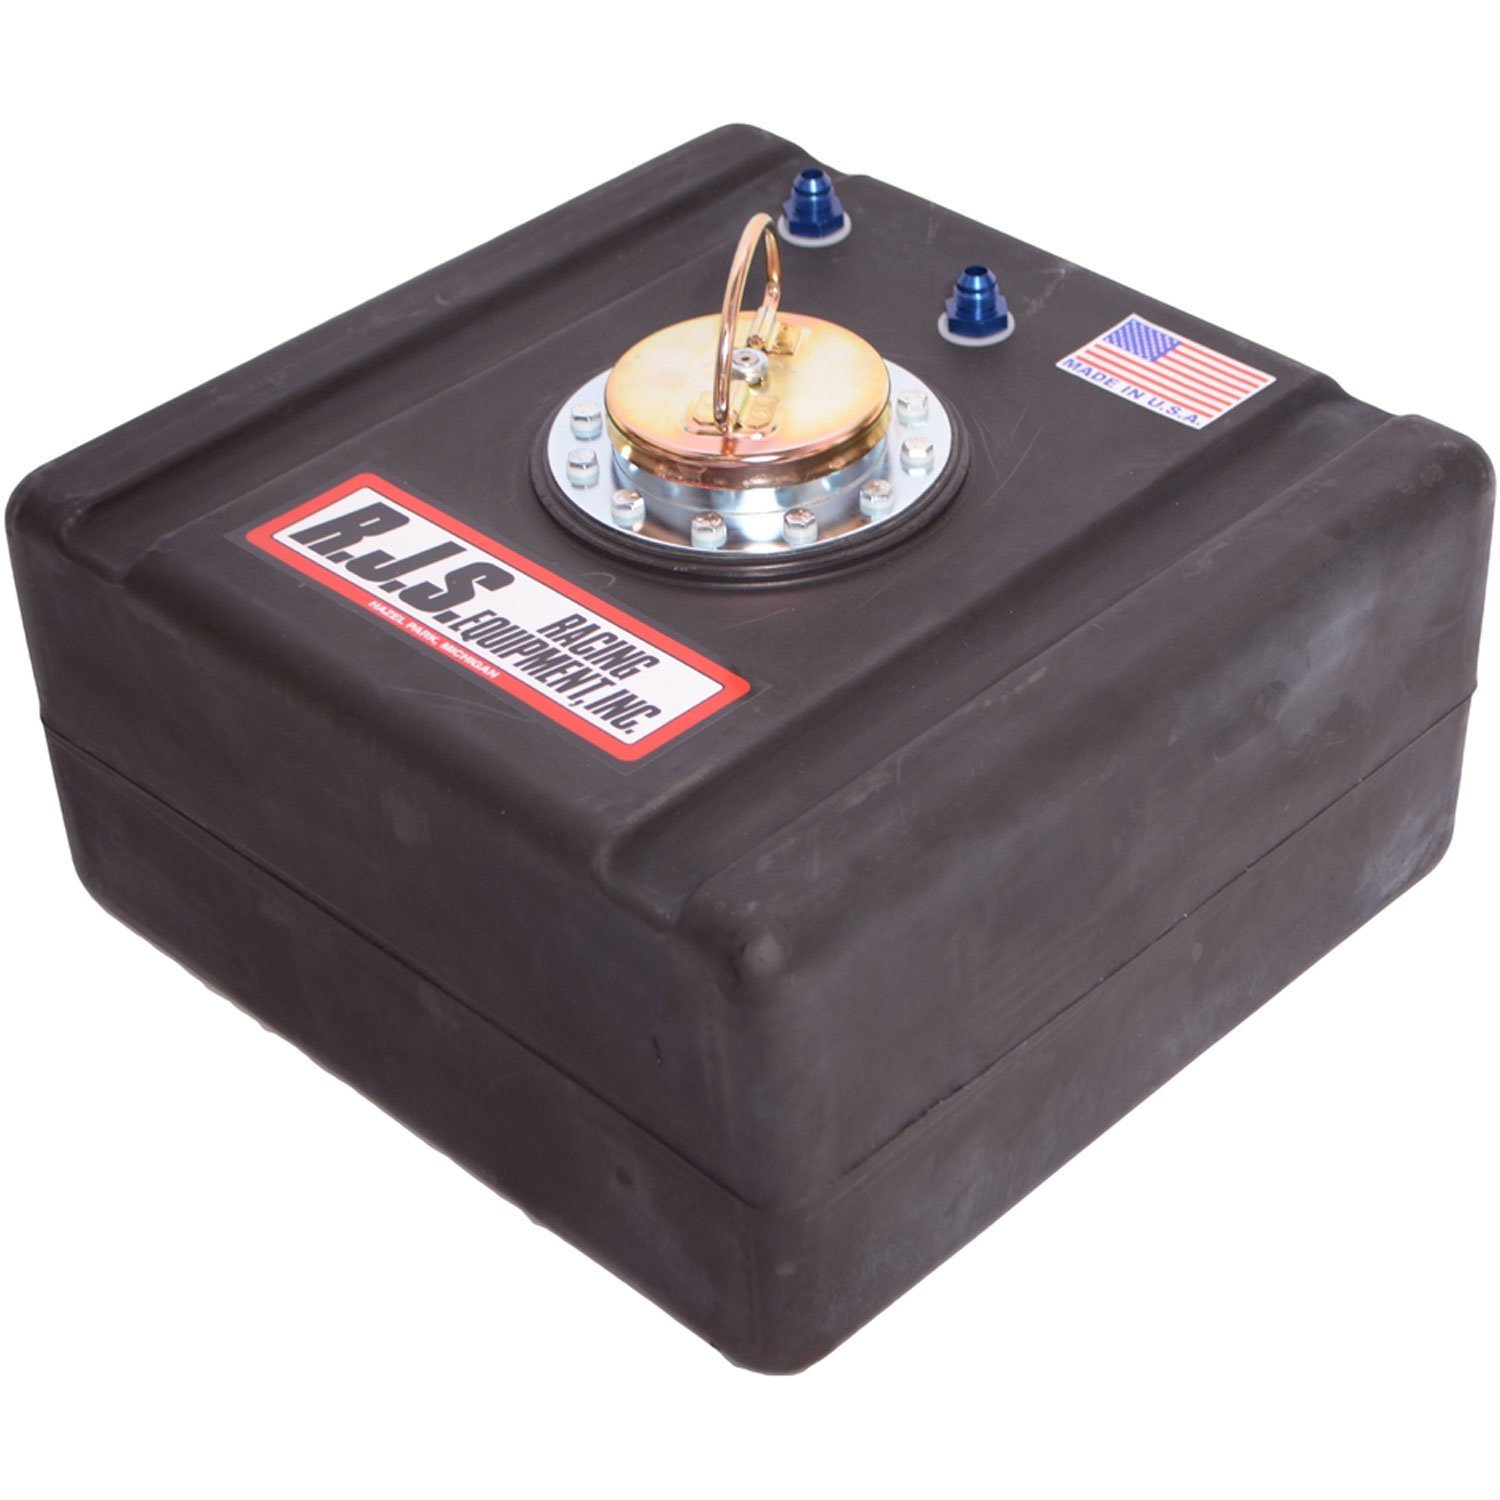 11 Gallon Economy Fuel Cell with Metal D-ring Filler Cap and Red Can